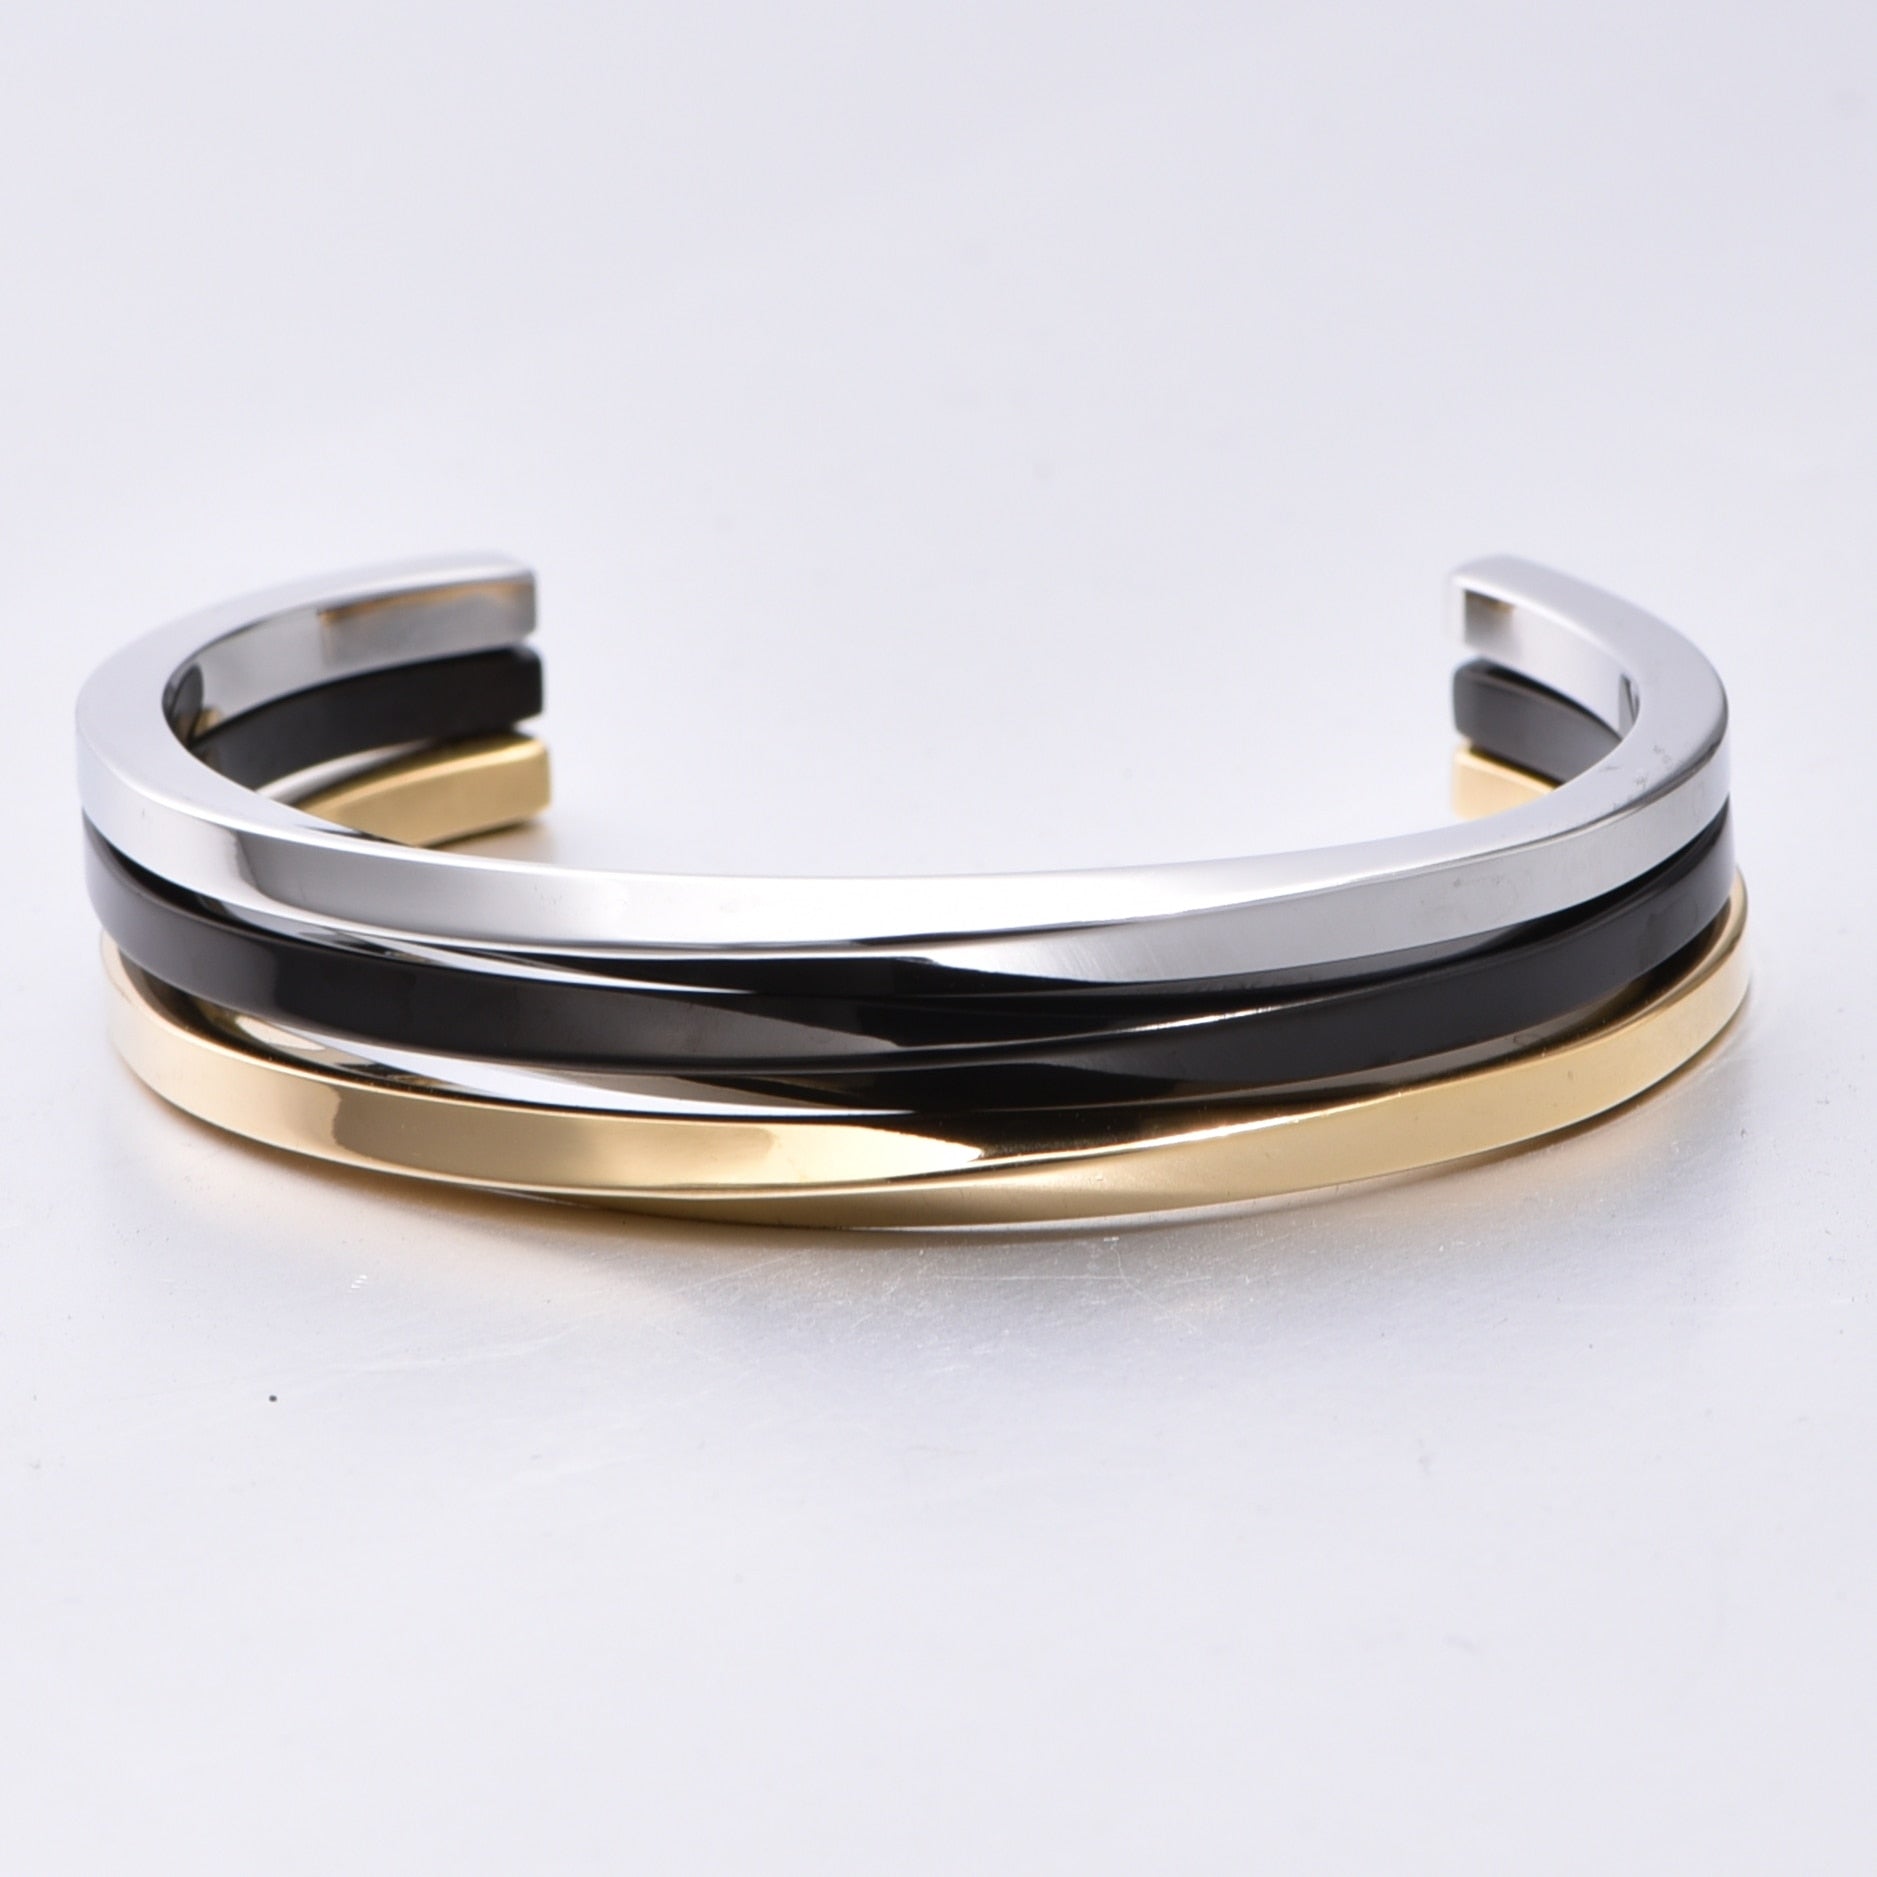 Classic Bangle Stainless for Men